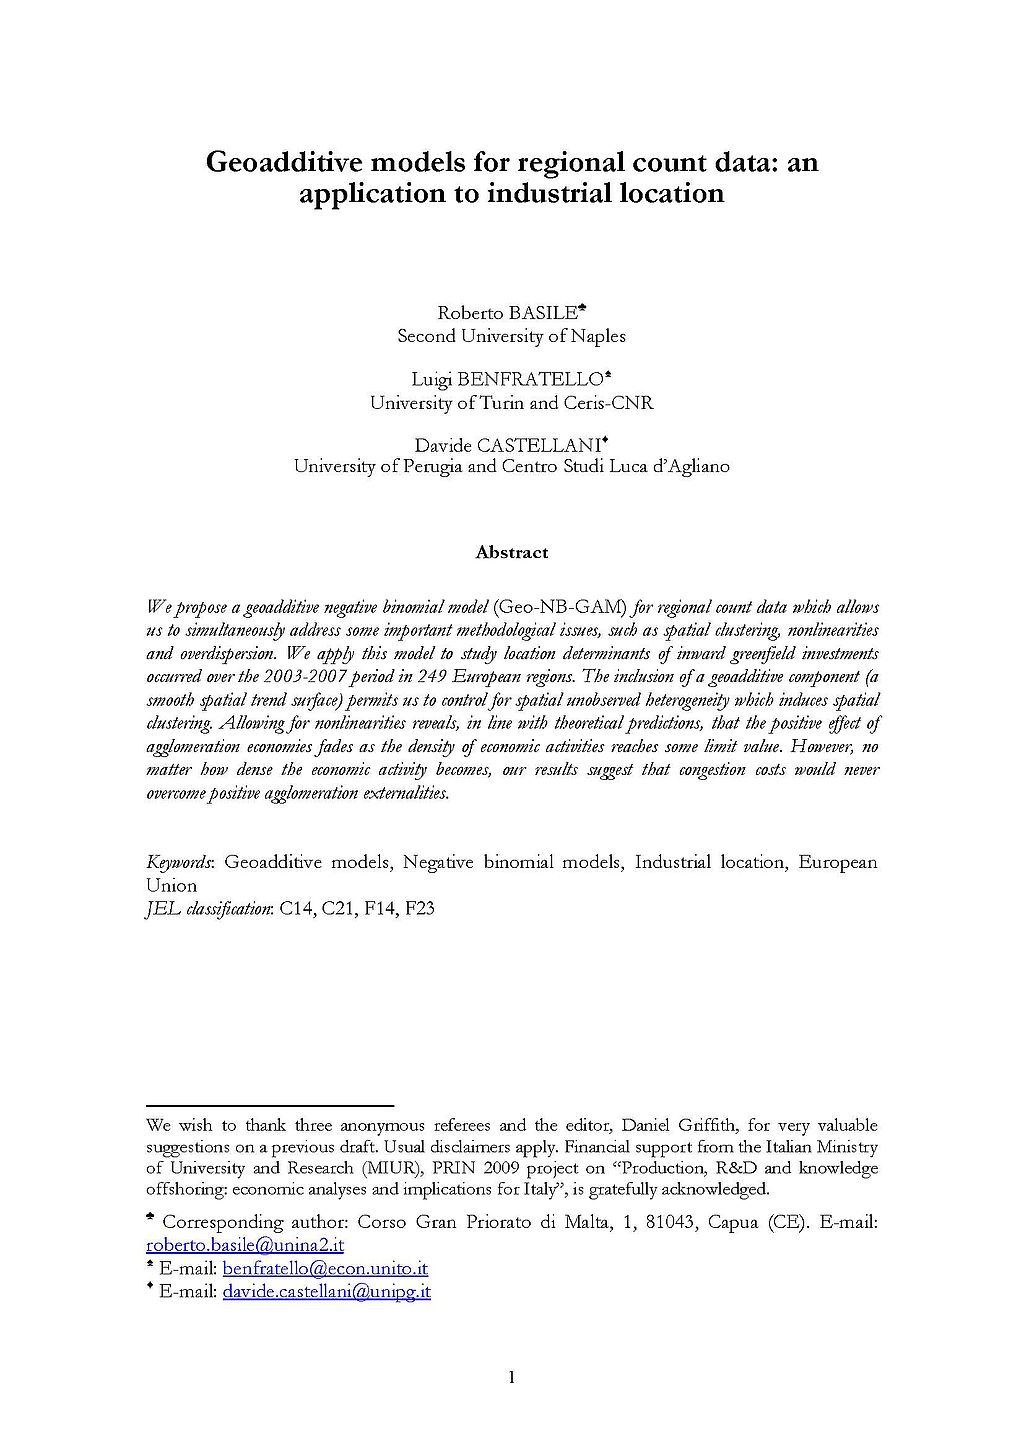 cover_ERSA-conference-papers_2012.jpg